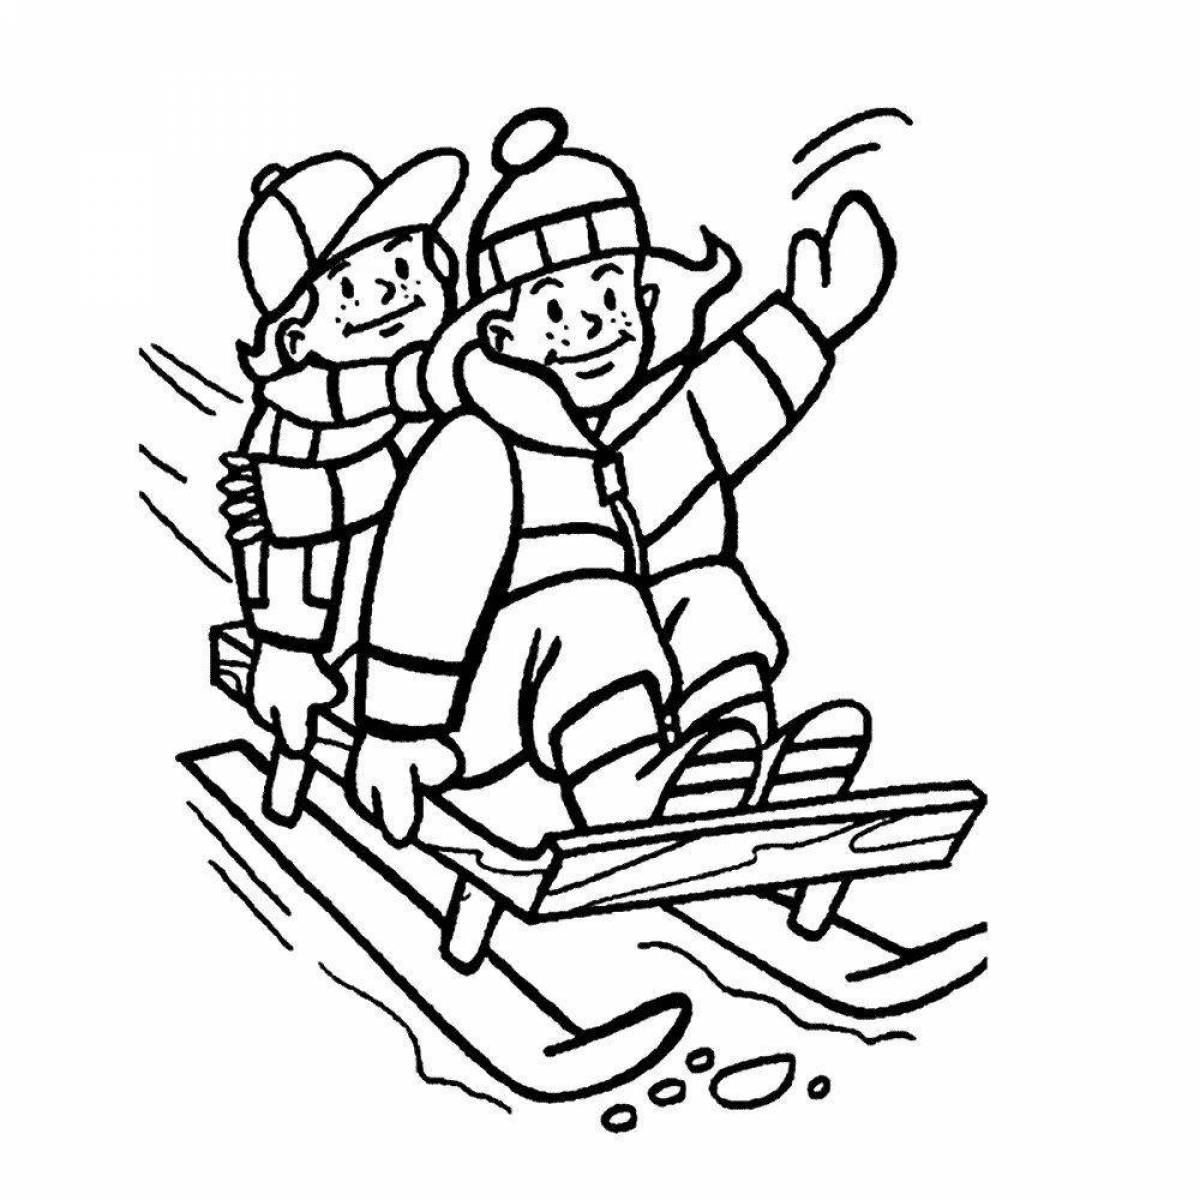 Exciting children's sled coloring book